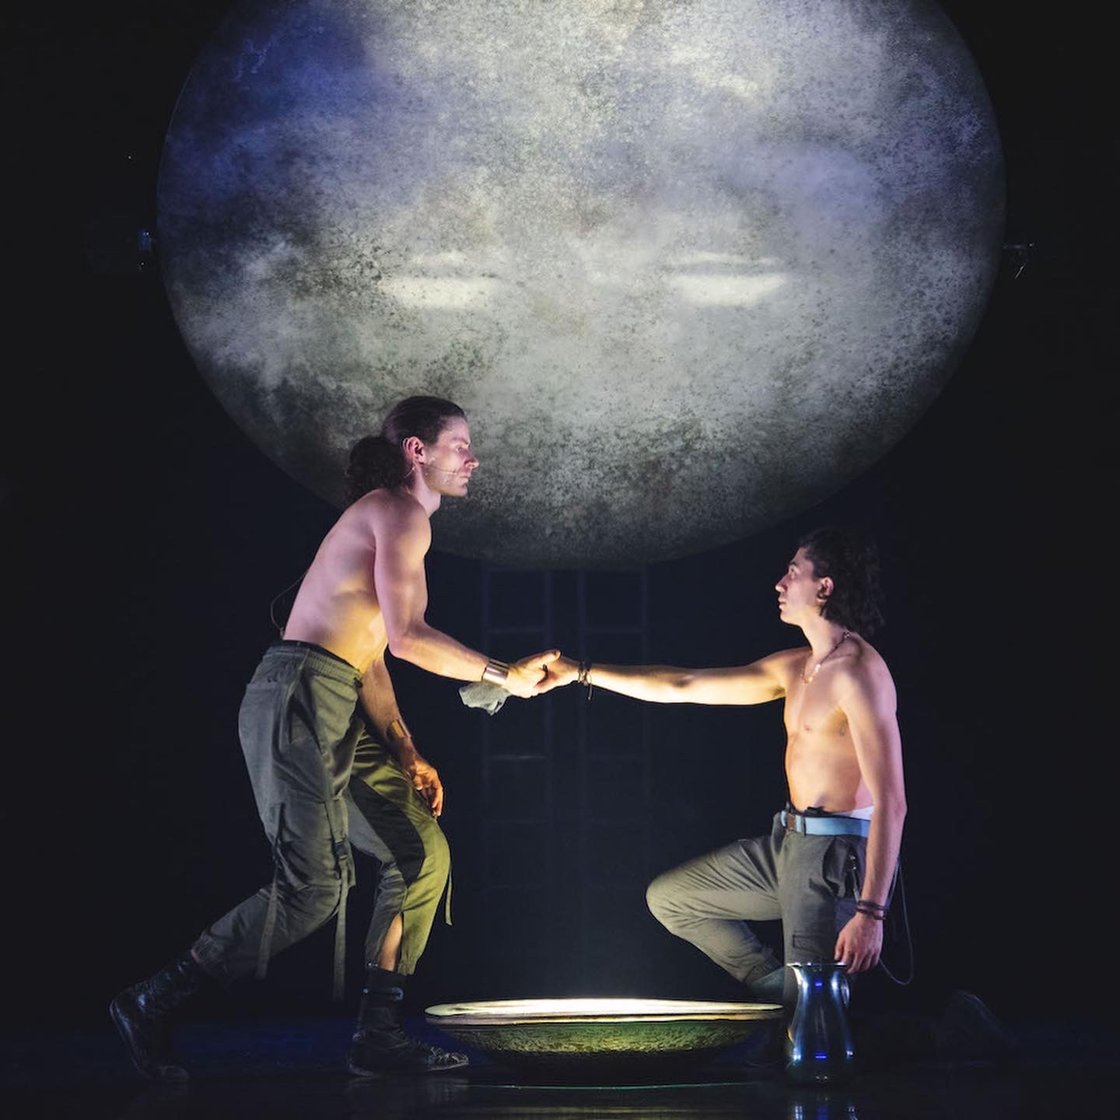 Stephen Madsen and Karl Richmond in Holding Achilles - in this scene they are bathing together, a heavy moon hangs above (image: Dean Hansen)